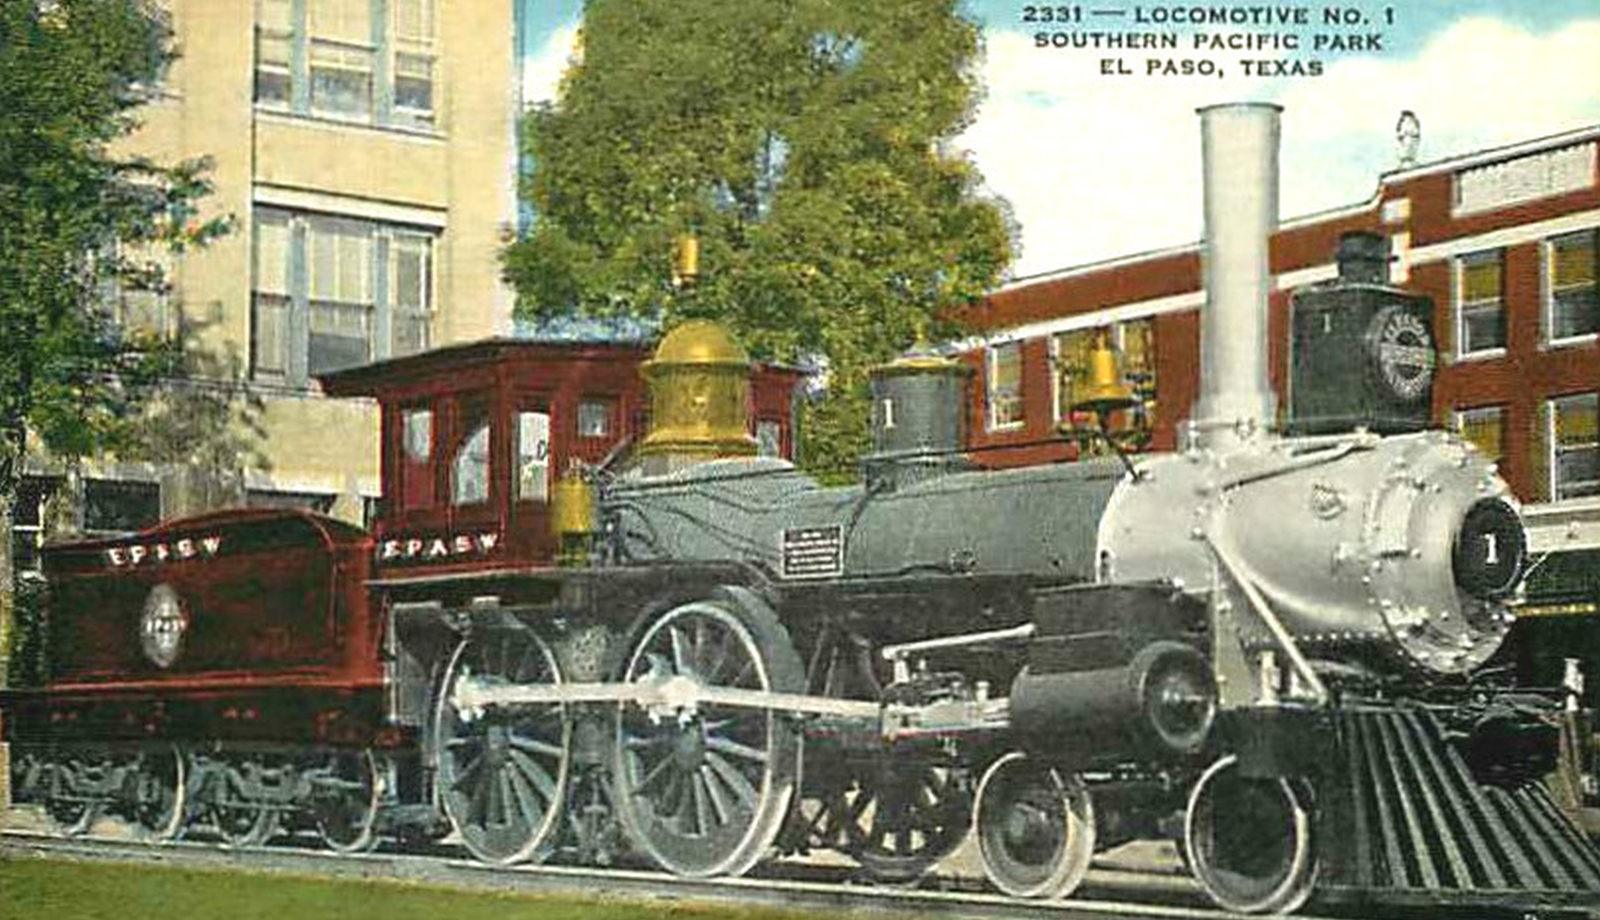 1953 post card with the No. 1 exhibited in El Paso